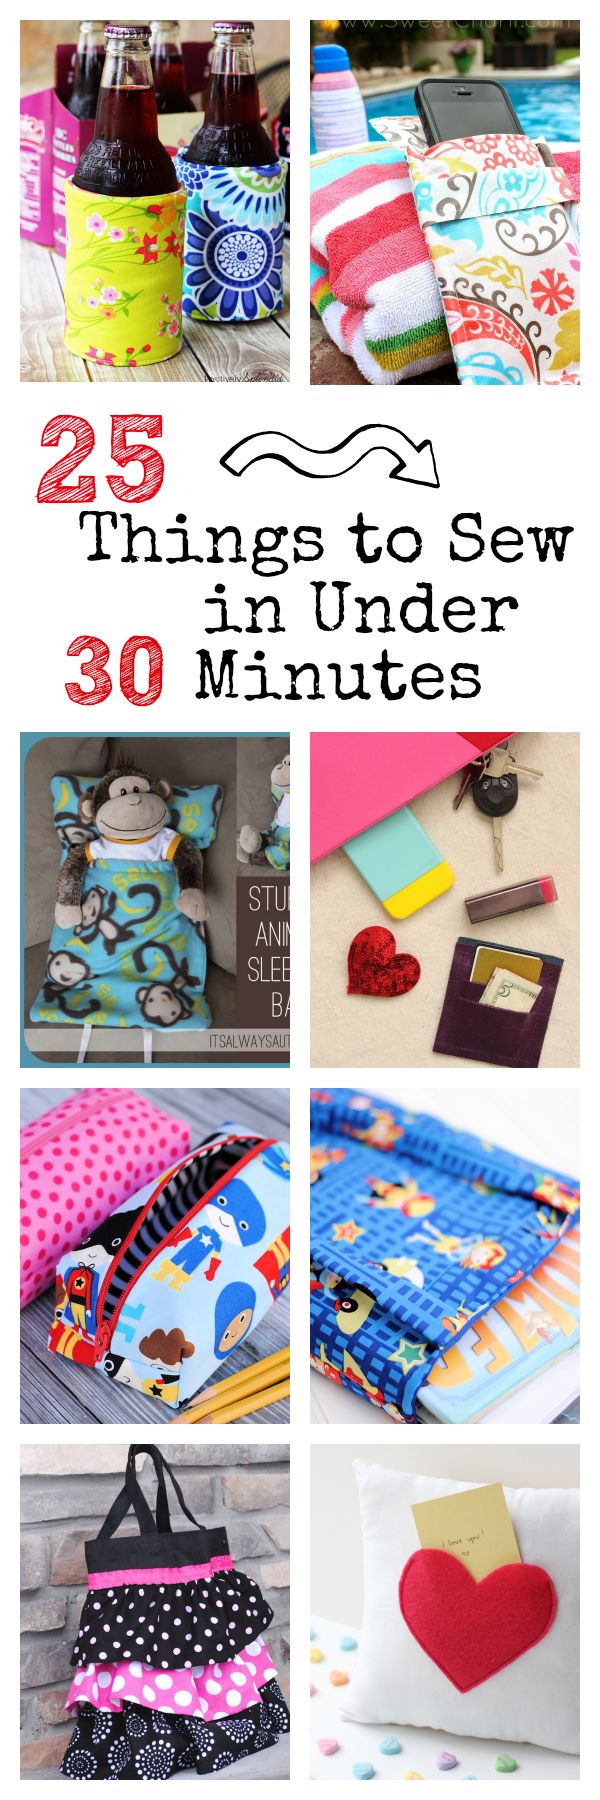 25 things to sew in under 30 minutes